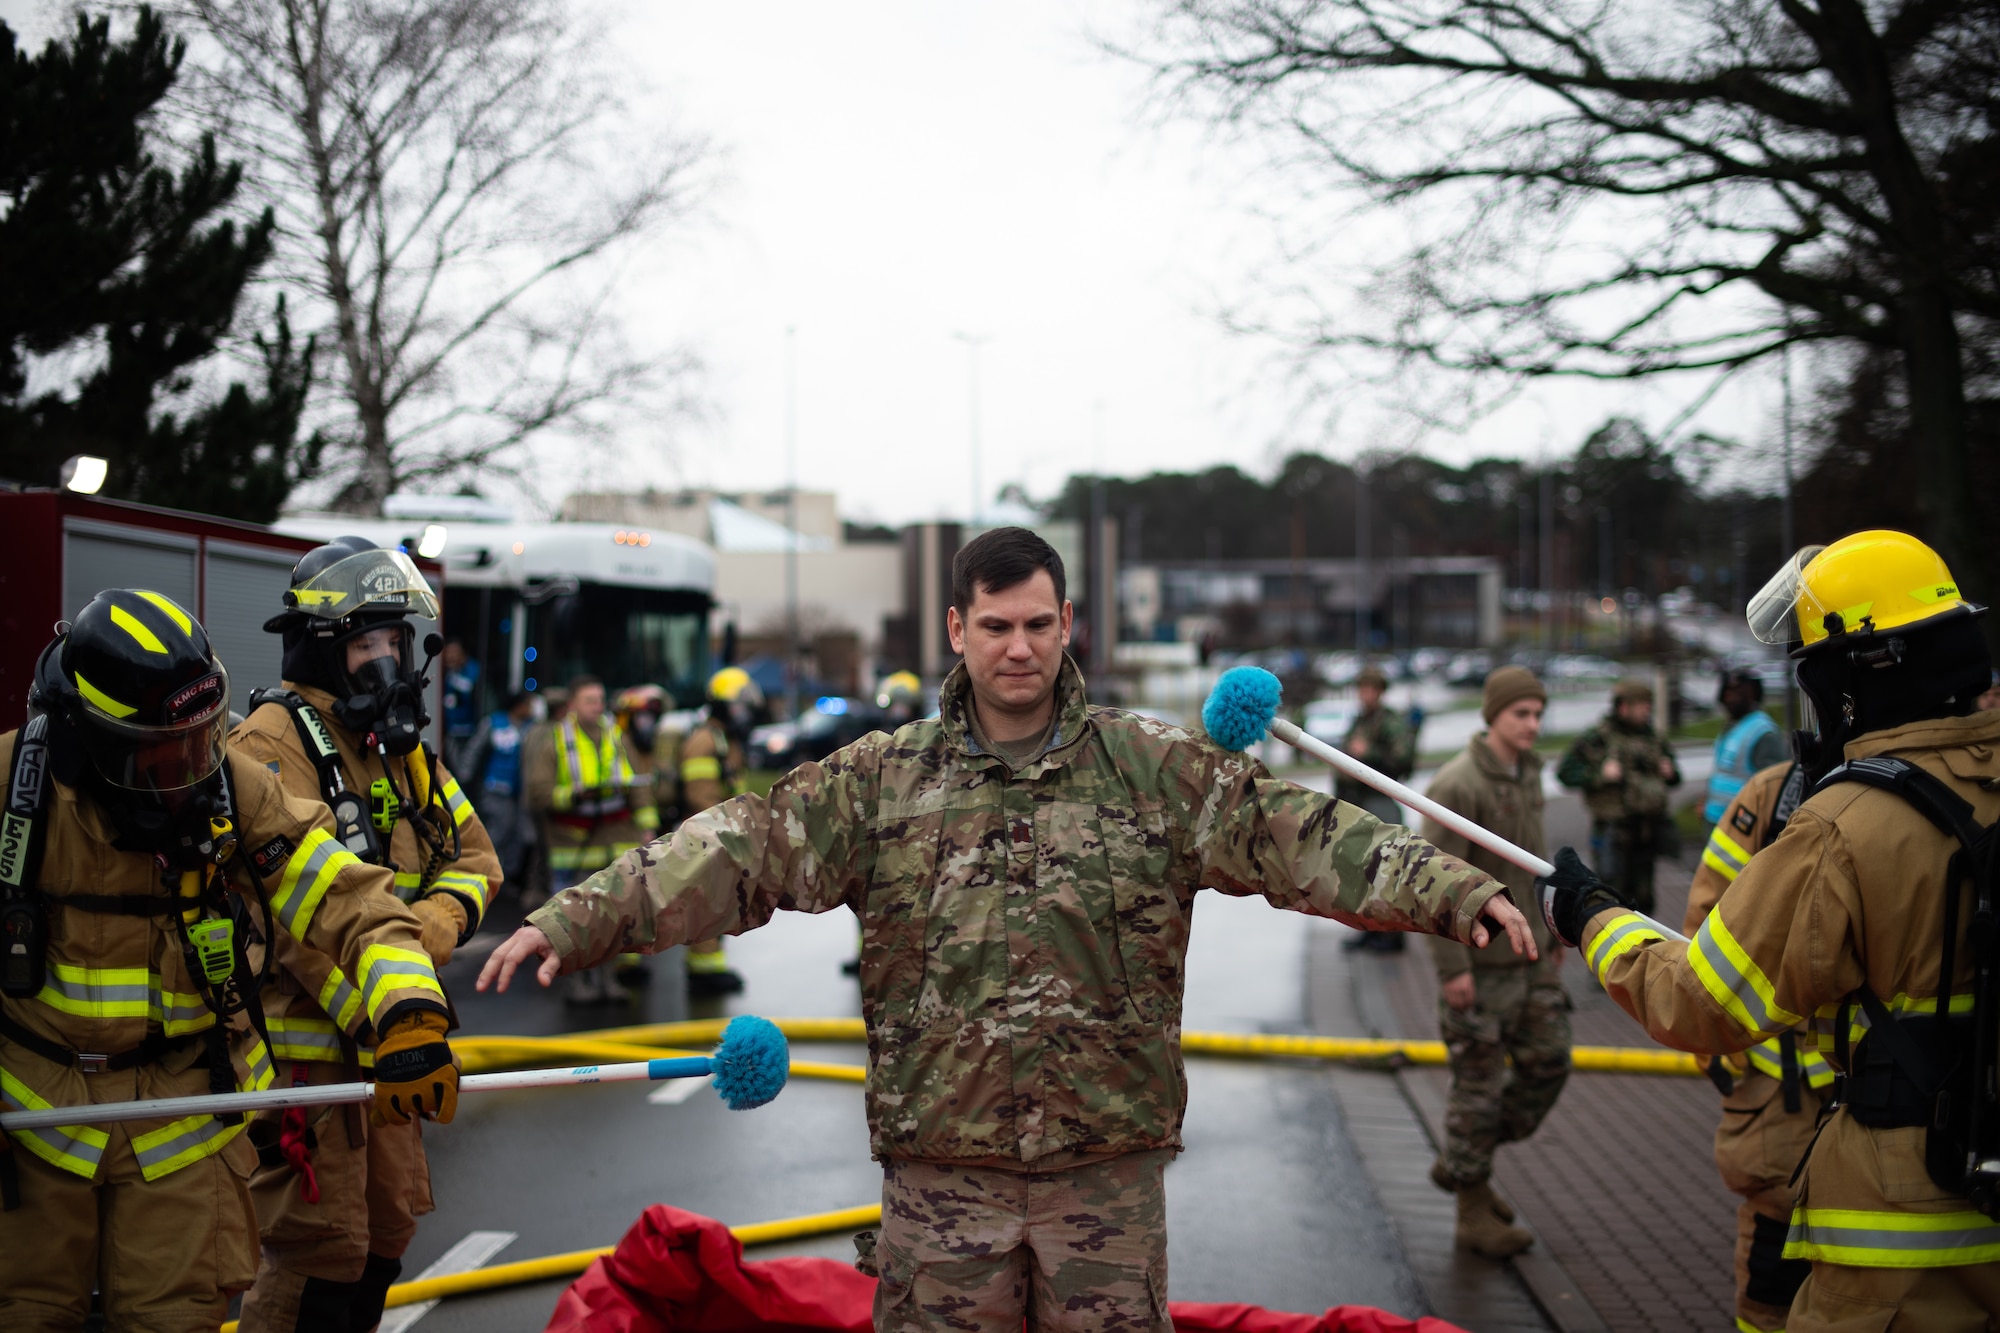 U.S. Air Force firefighters assigned to the 86th Civil Engineer Squadron simulate a decontamination line during exercise Operation Varsity 19-04, at Ramstein Air Base, Germany, Dec. 12, 2019. Operation Varsity is a reoccurring exercise designed to improve readiness when dealing with potential enemy threats and attacks. (U.S. Air Force photo by Staff Sgt. Devin Boyer)